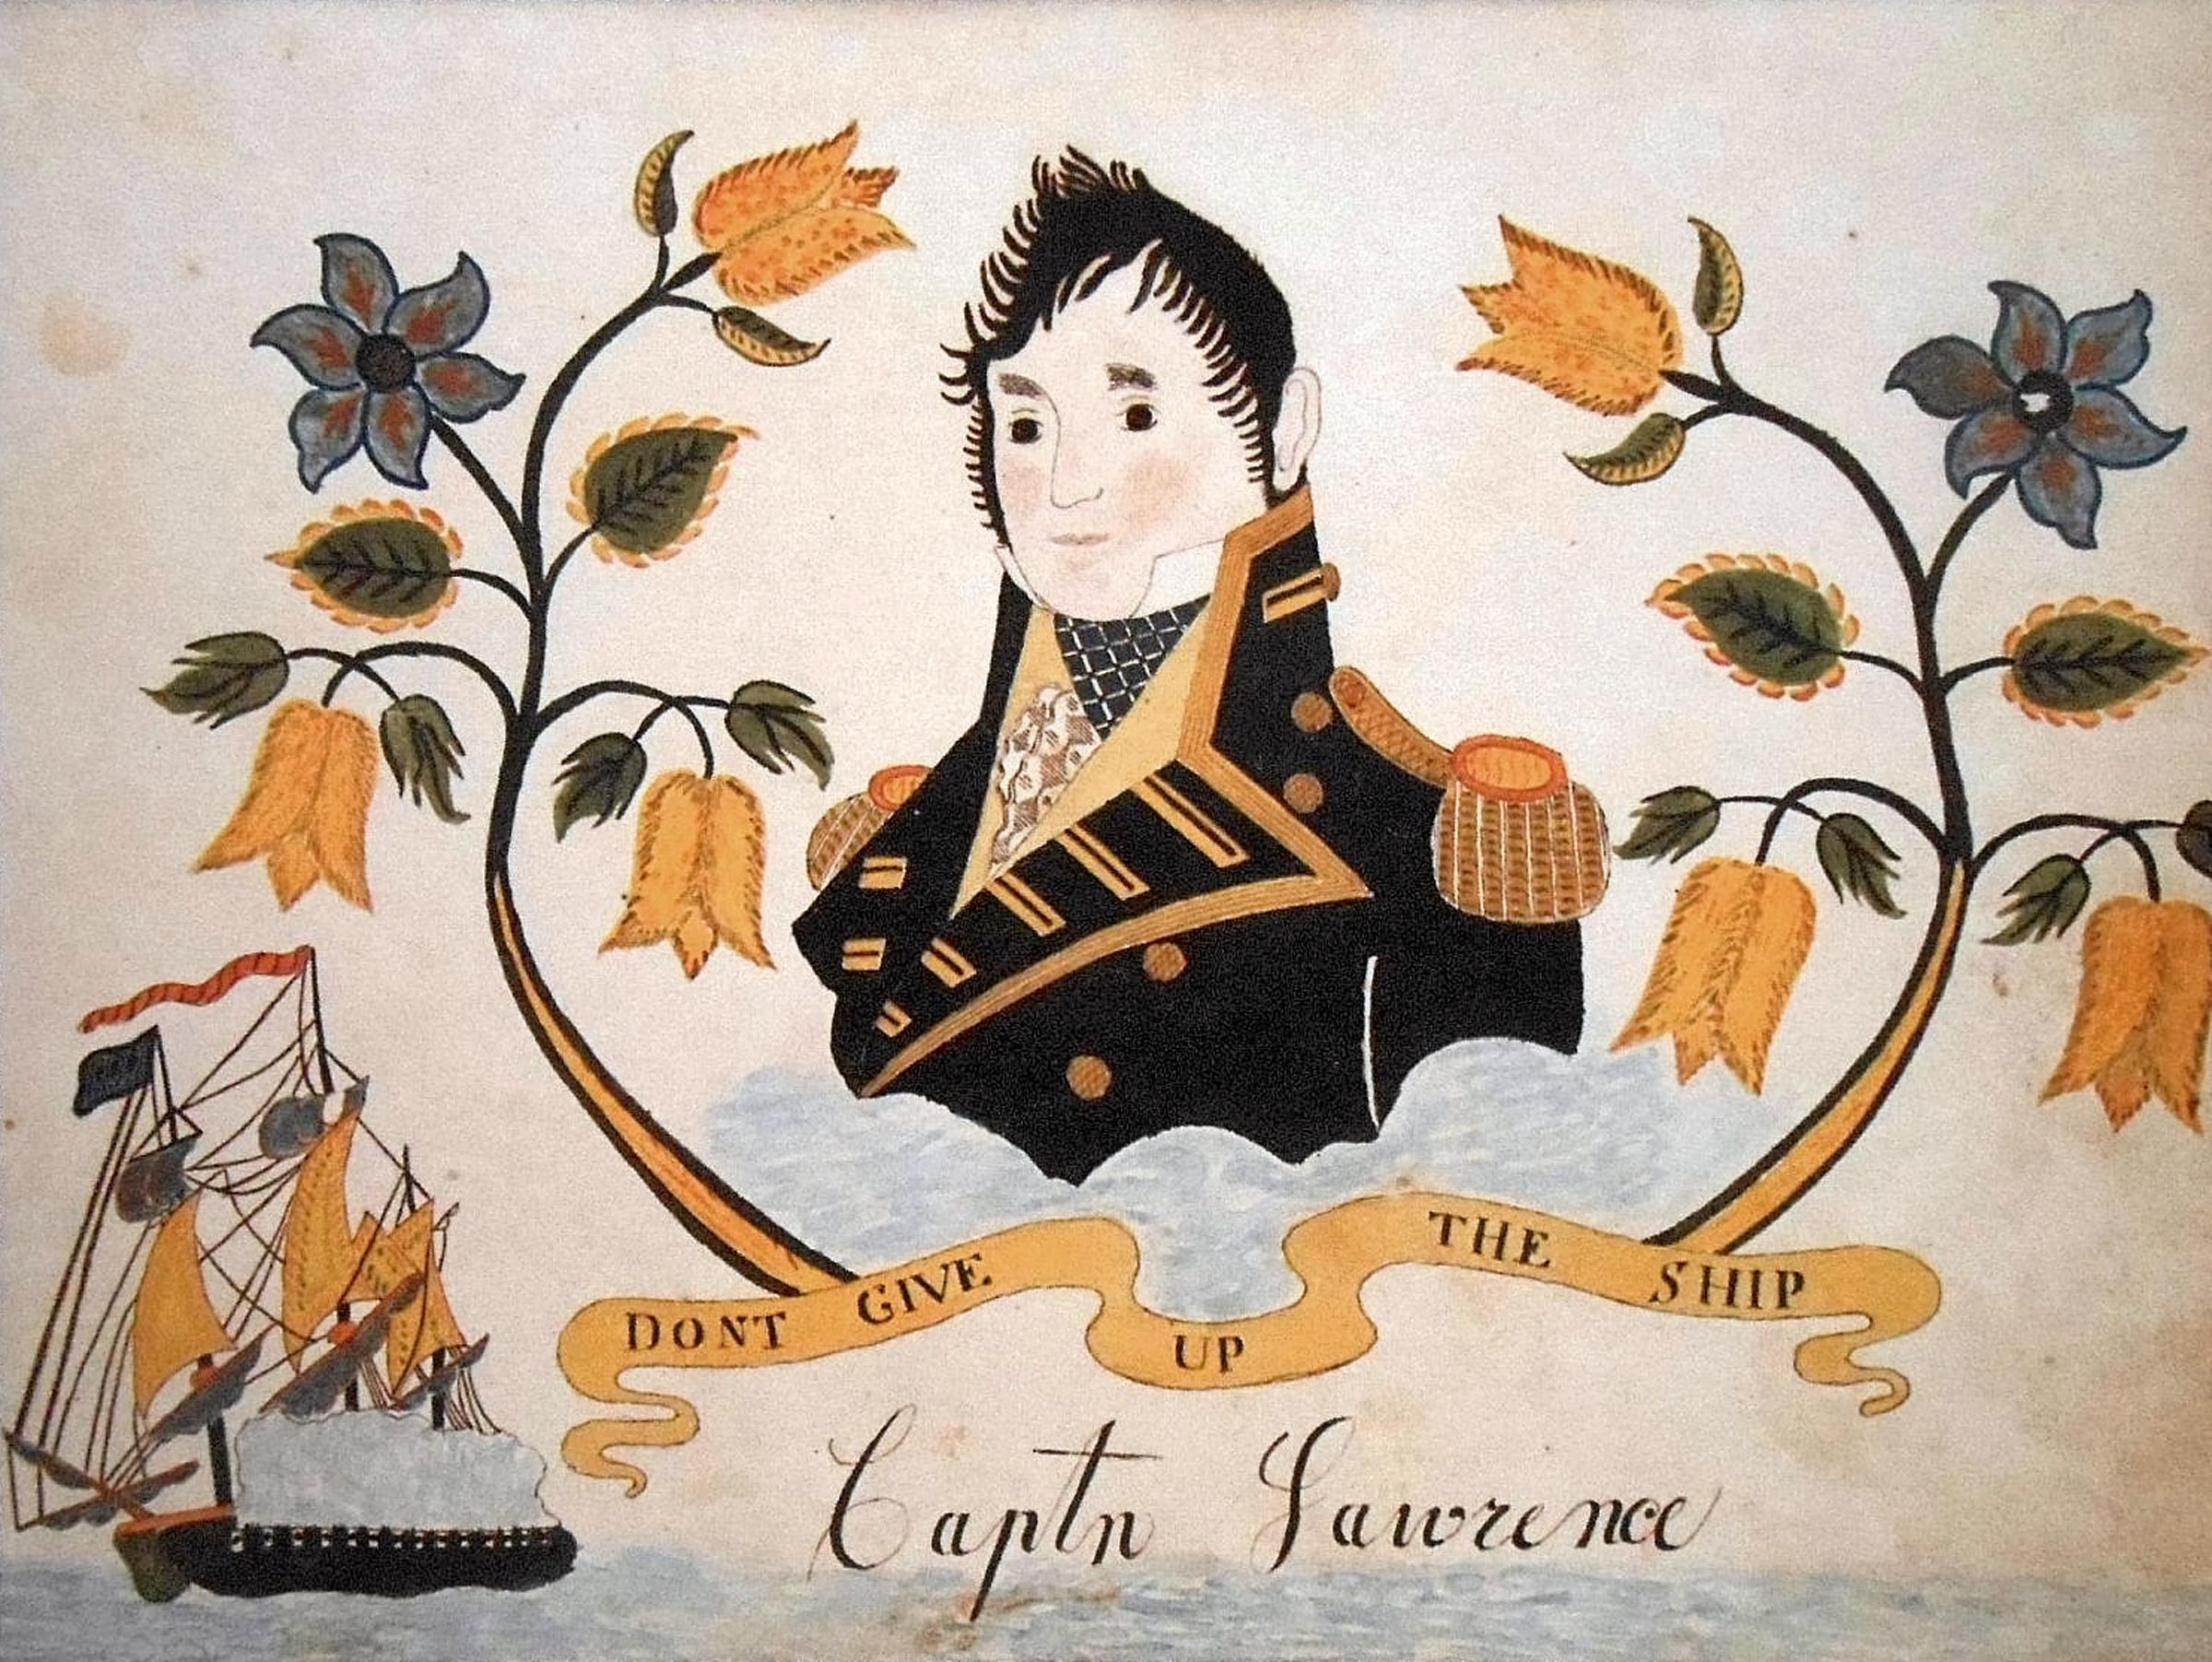 Attributed to Johannes Bard, Captn Lawrence